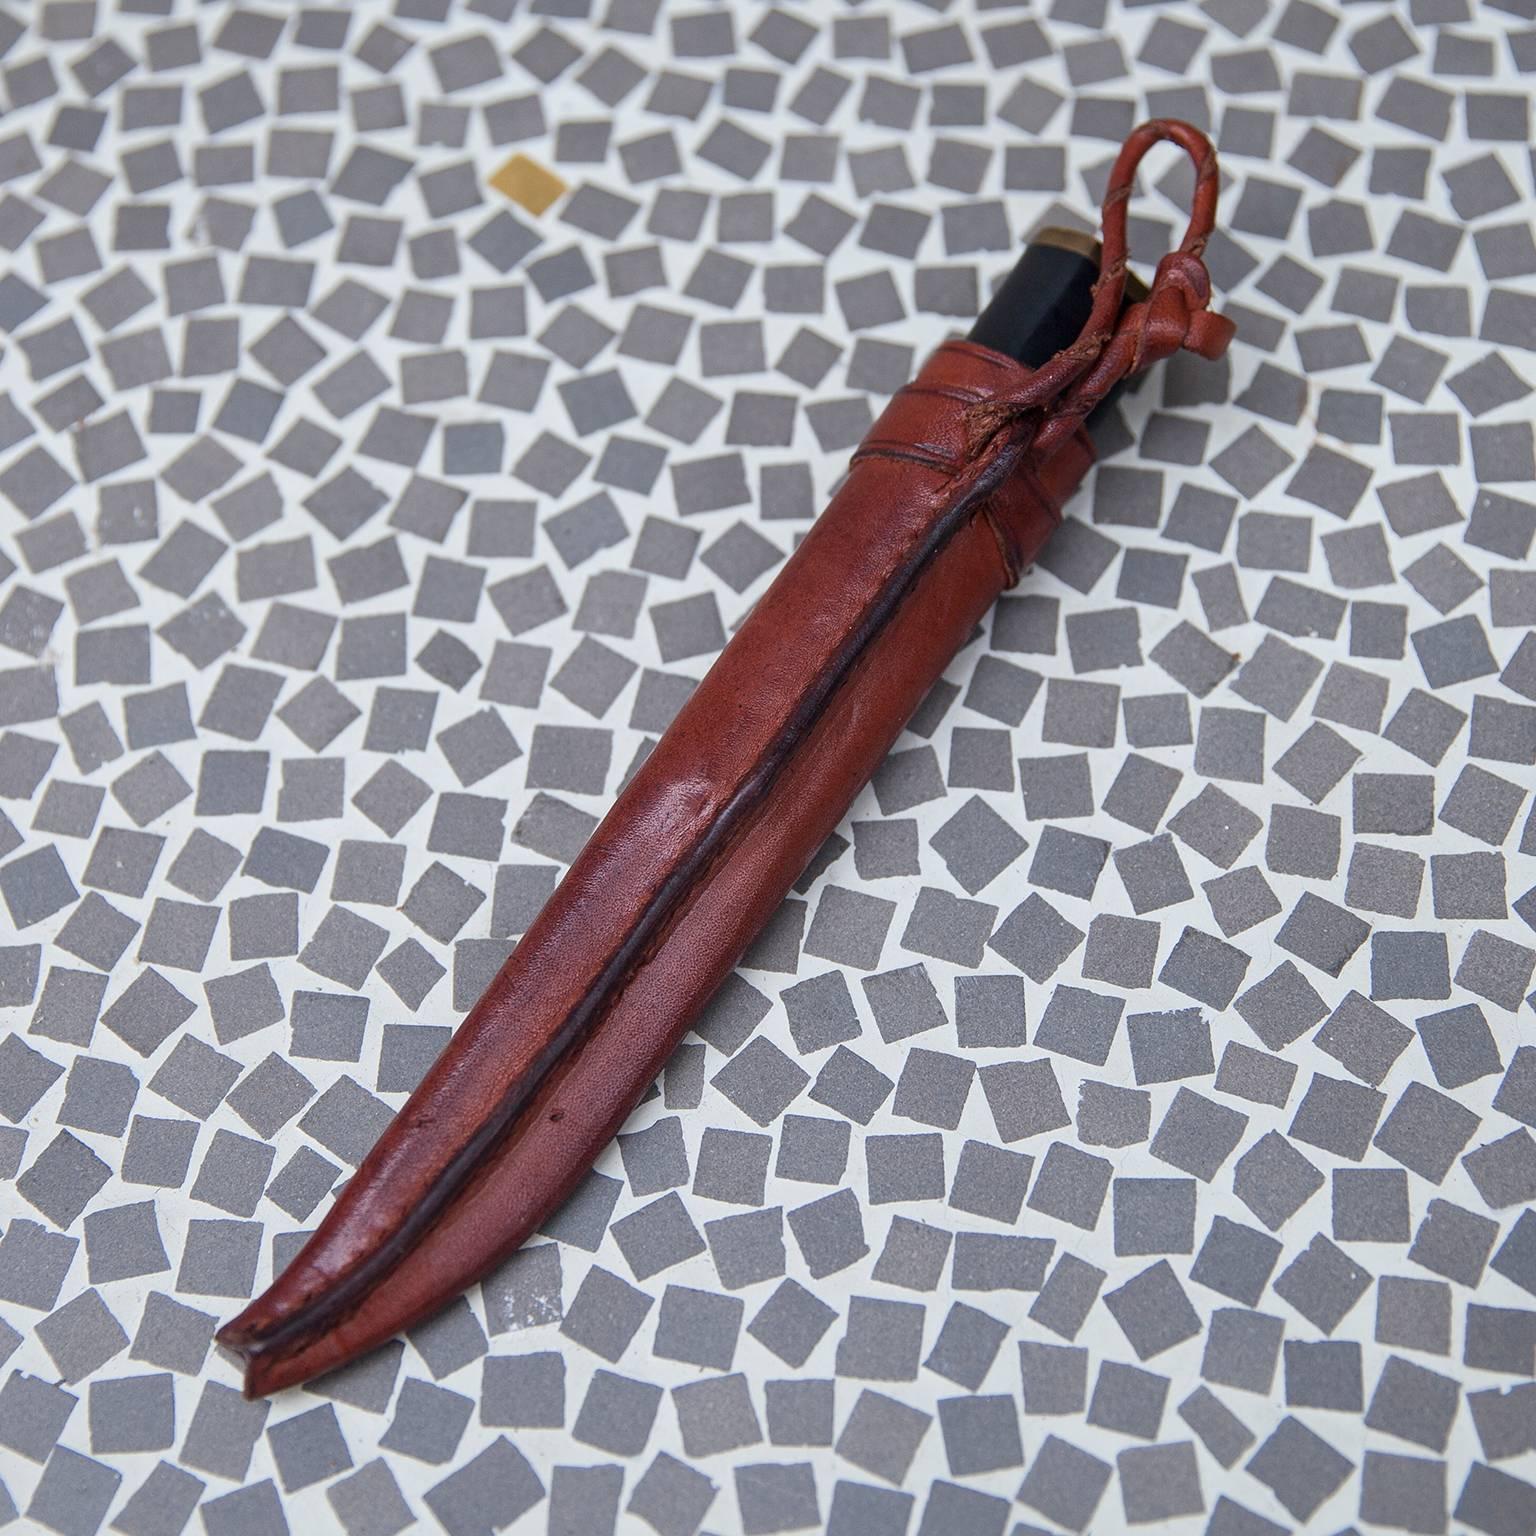 Stainless steel blade with black nylon handle and brass fittings. Leather sheathes included. Original natural hide Sheathes with bear claw impressions. Blades marked with manufacturer's information and the artist's name.